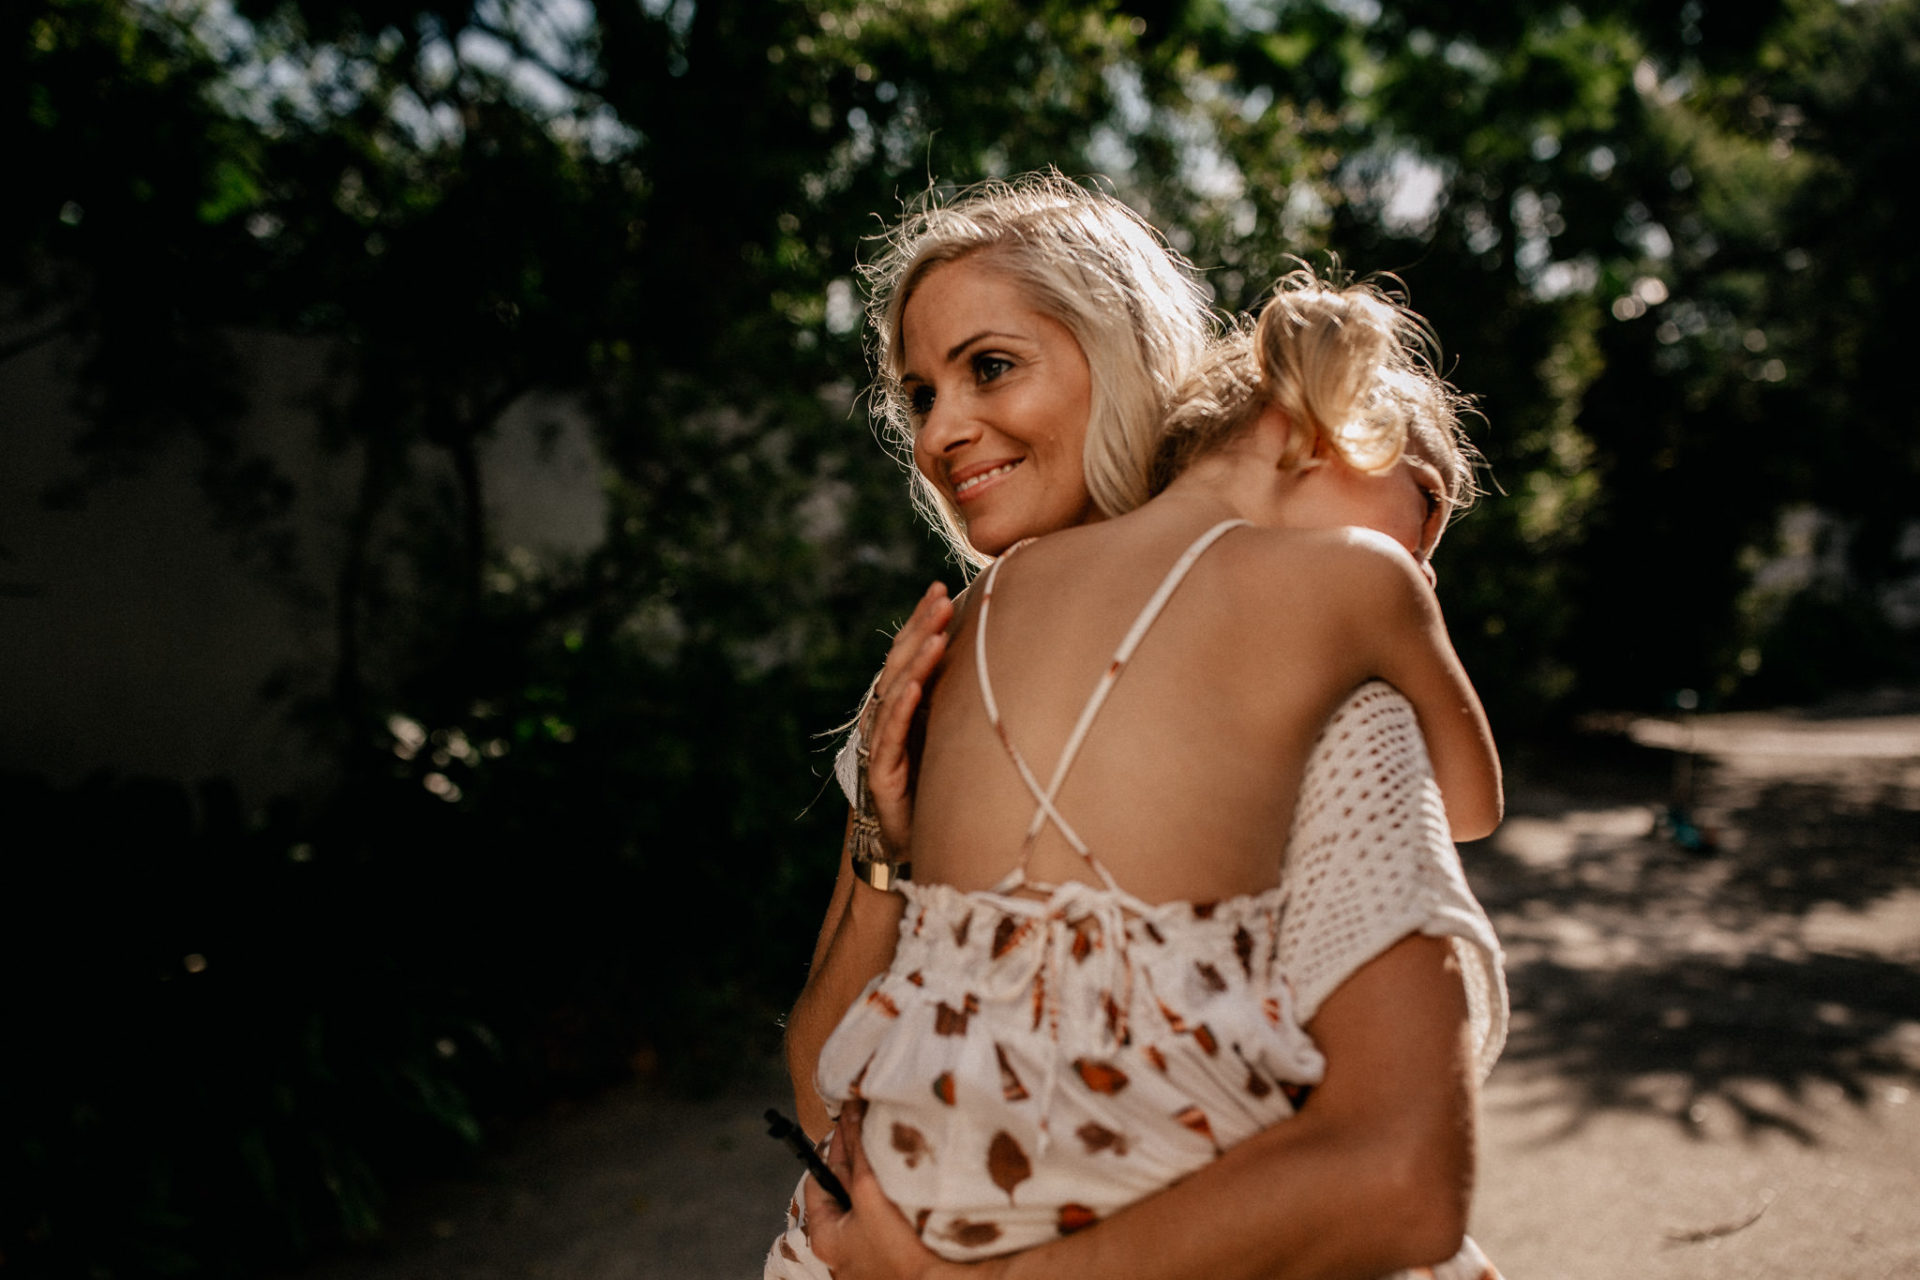 Sydney family photographer-homestory with kids-quirky documentary unposed wedding photography-melbourne family photography-candid moments-hip kids apparel